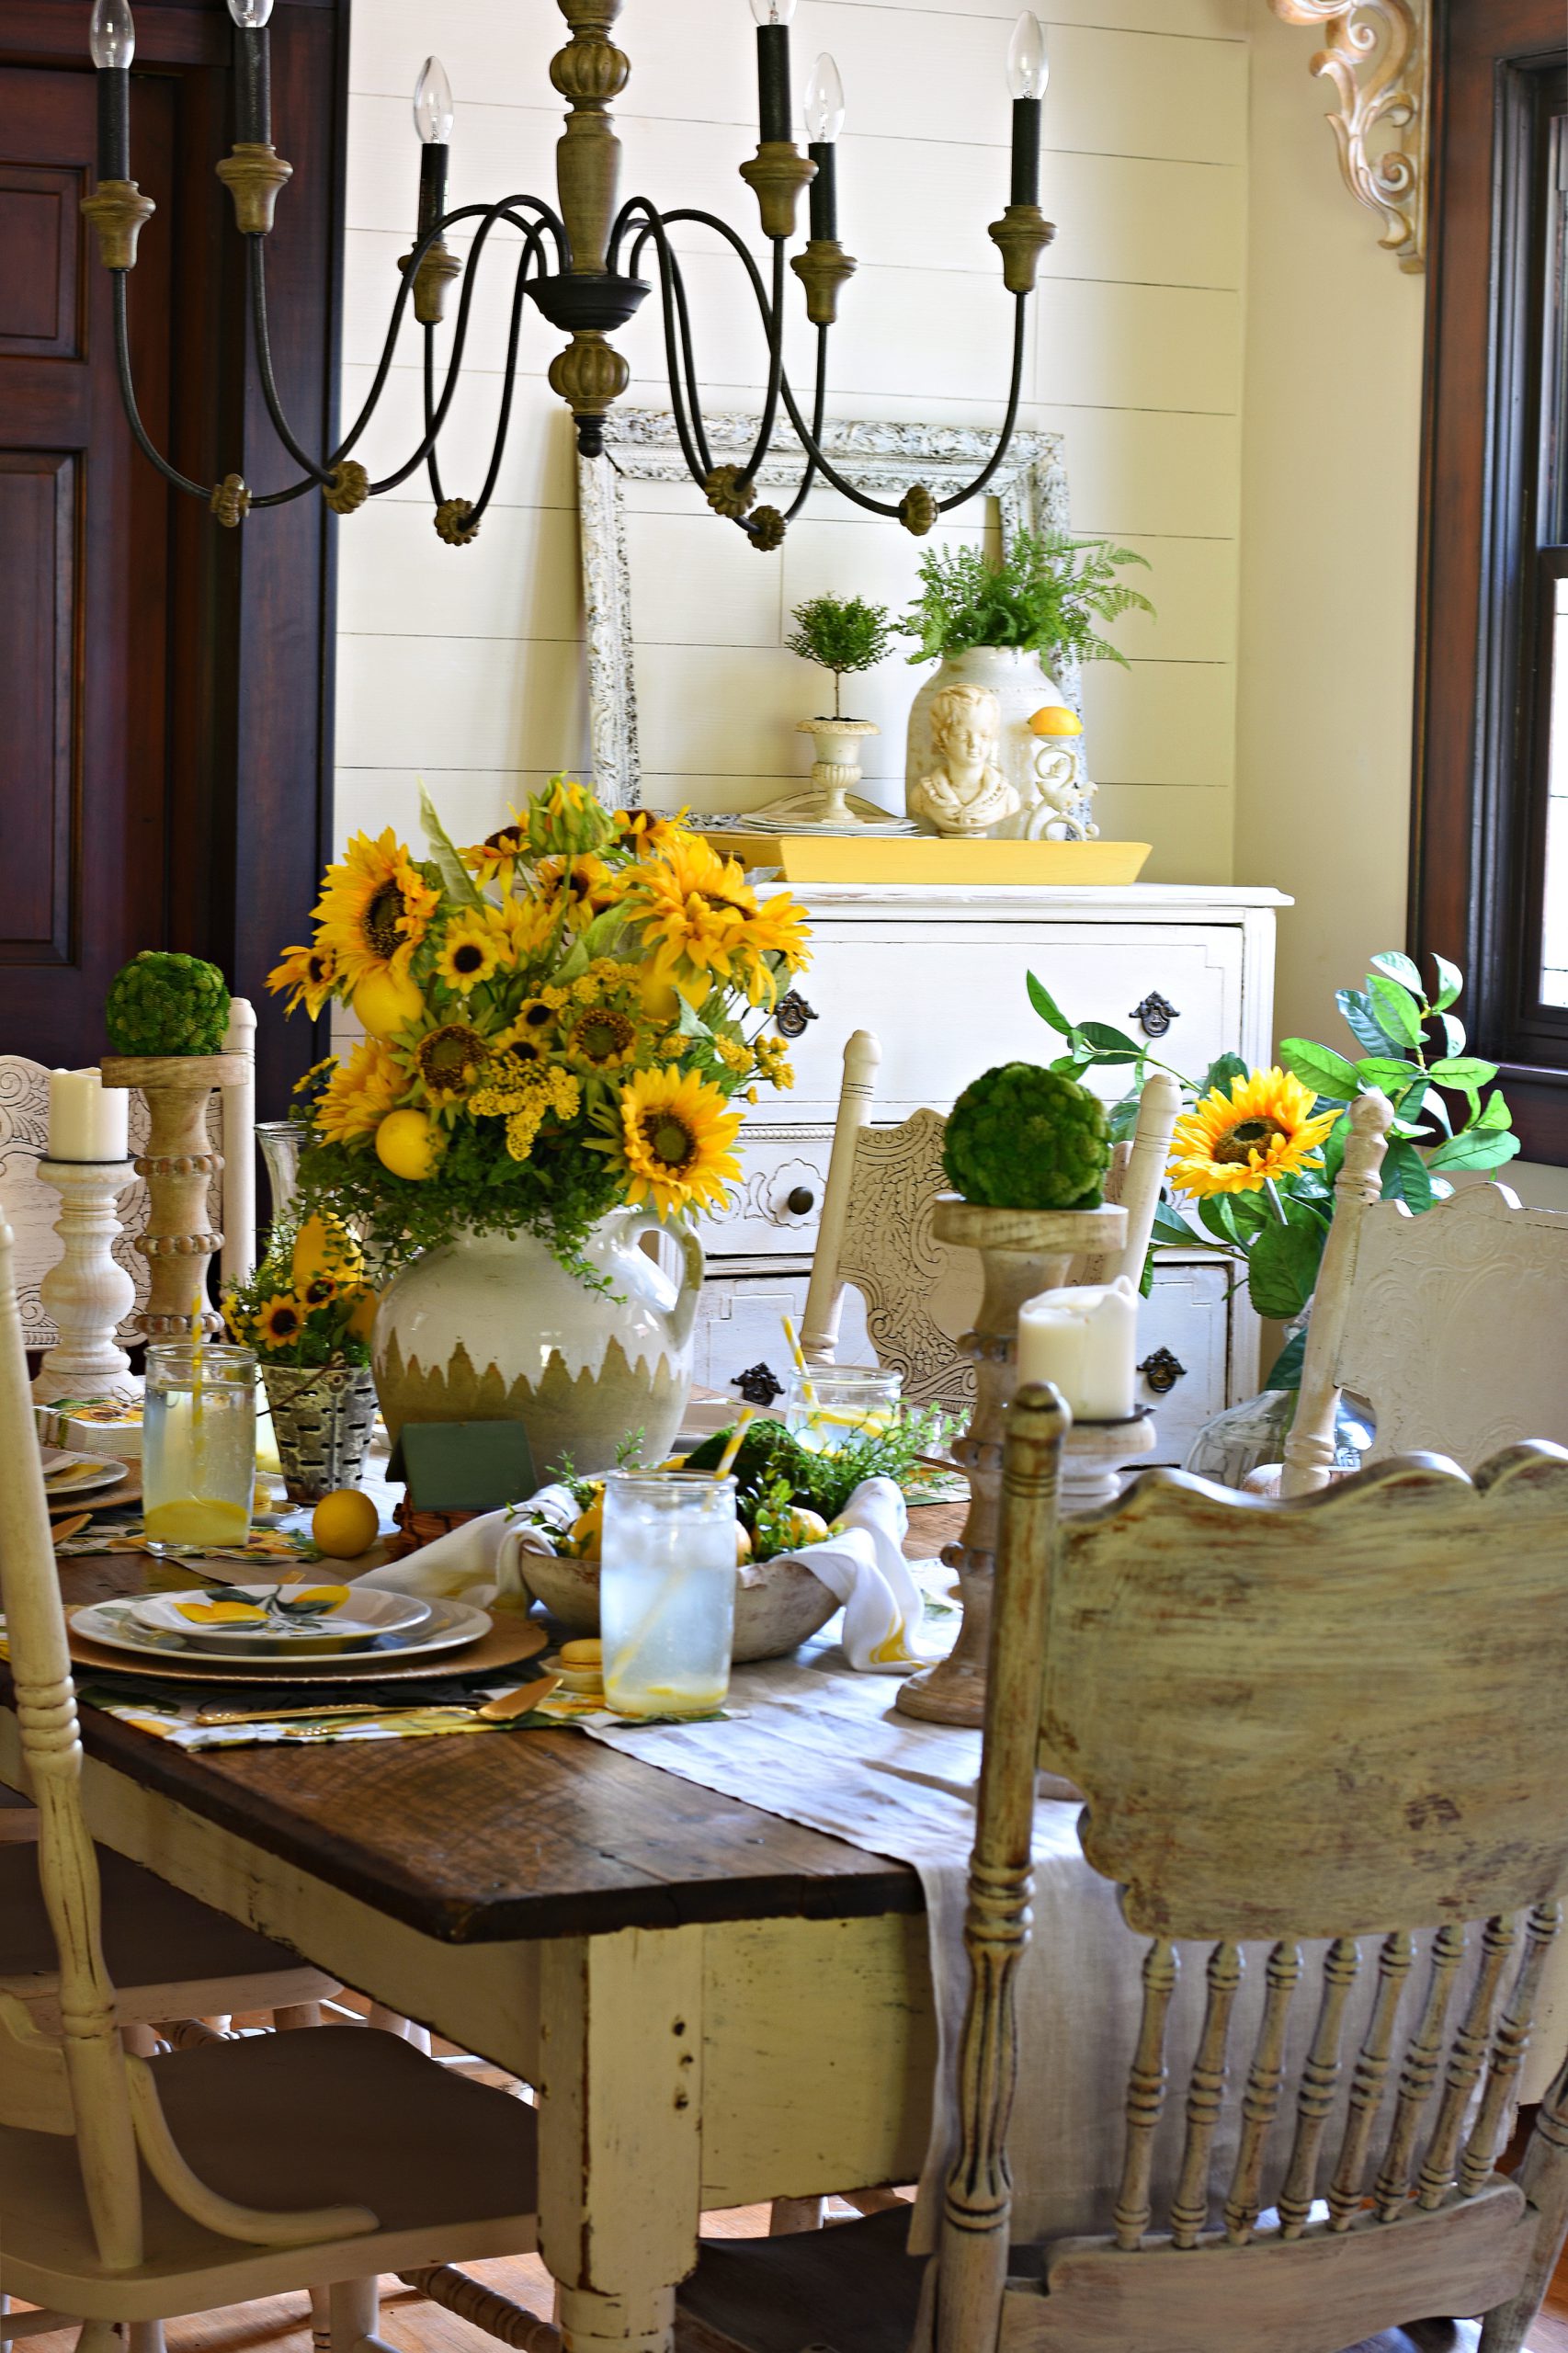 Sunflower as a Vibrant Accent